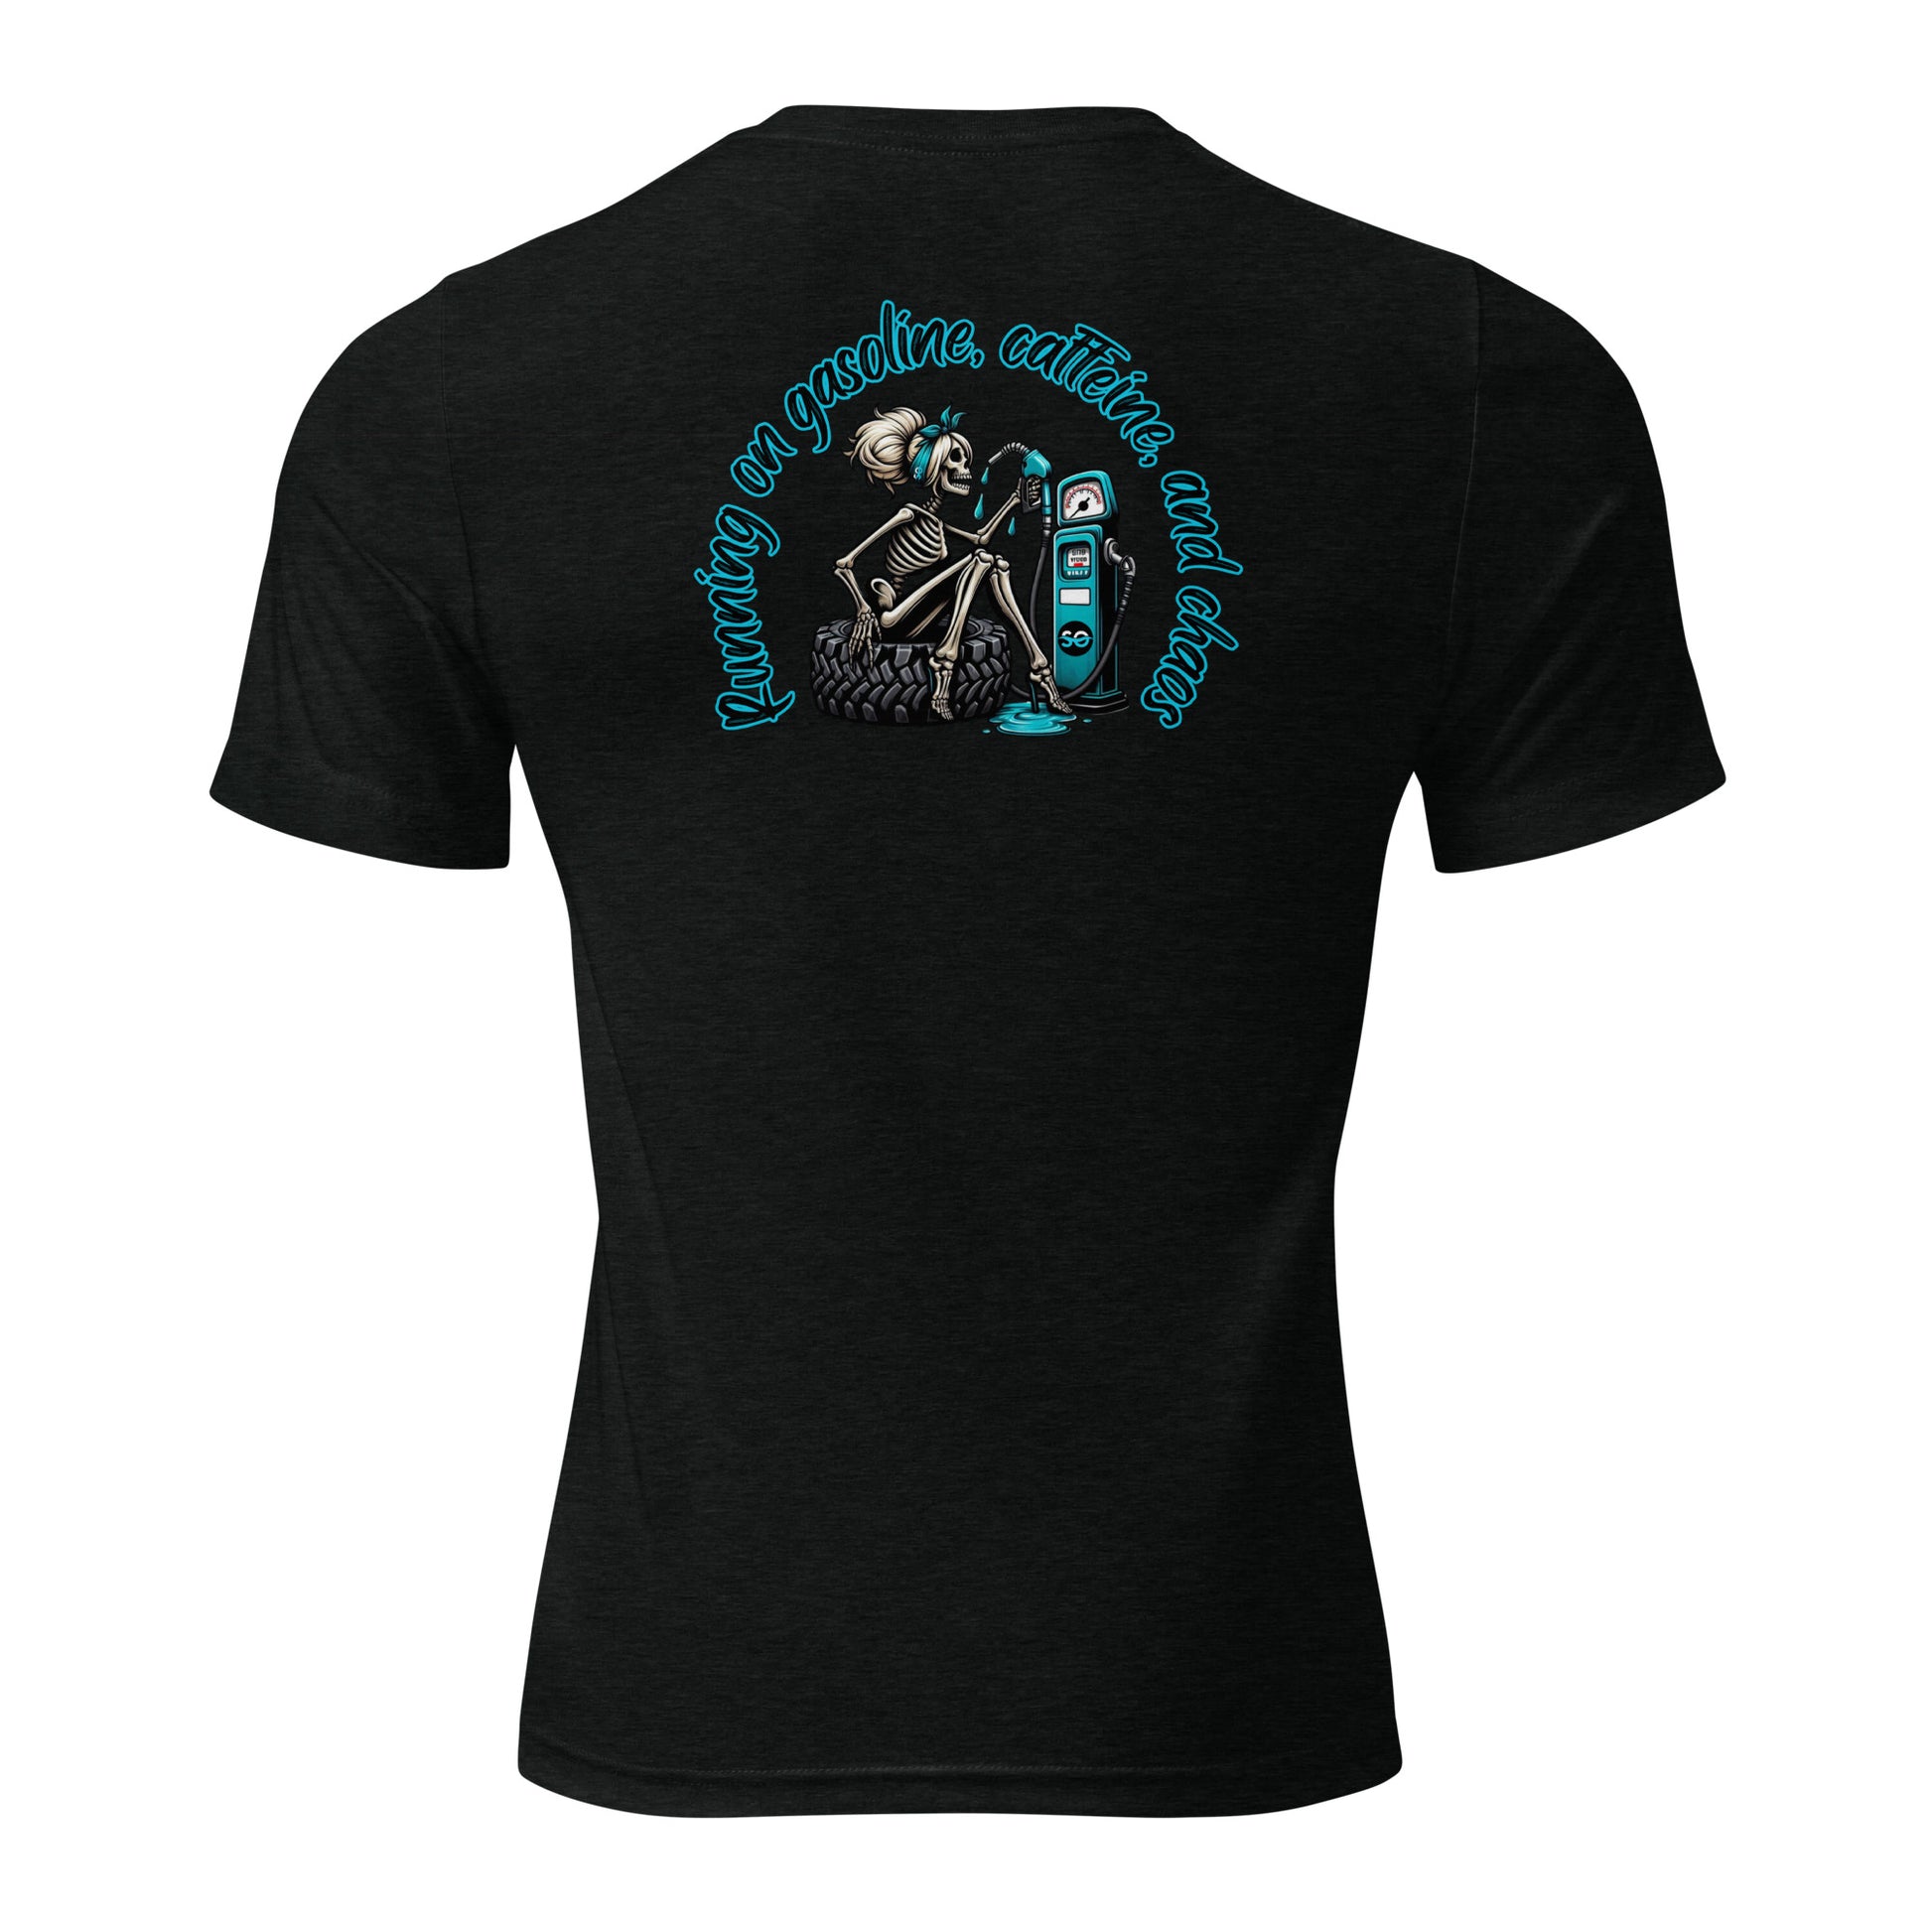 a black t - shirt with a skeleton riding a snowboard